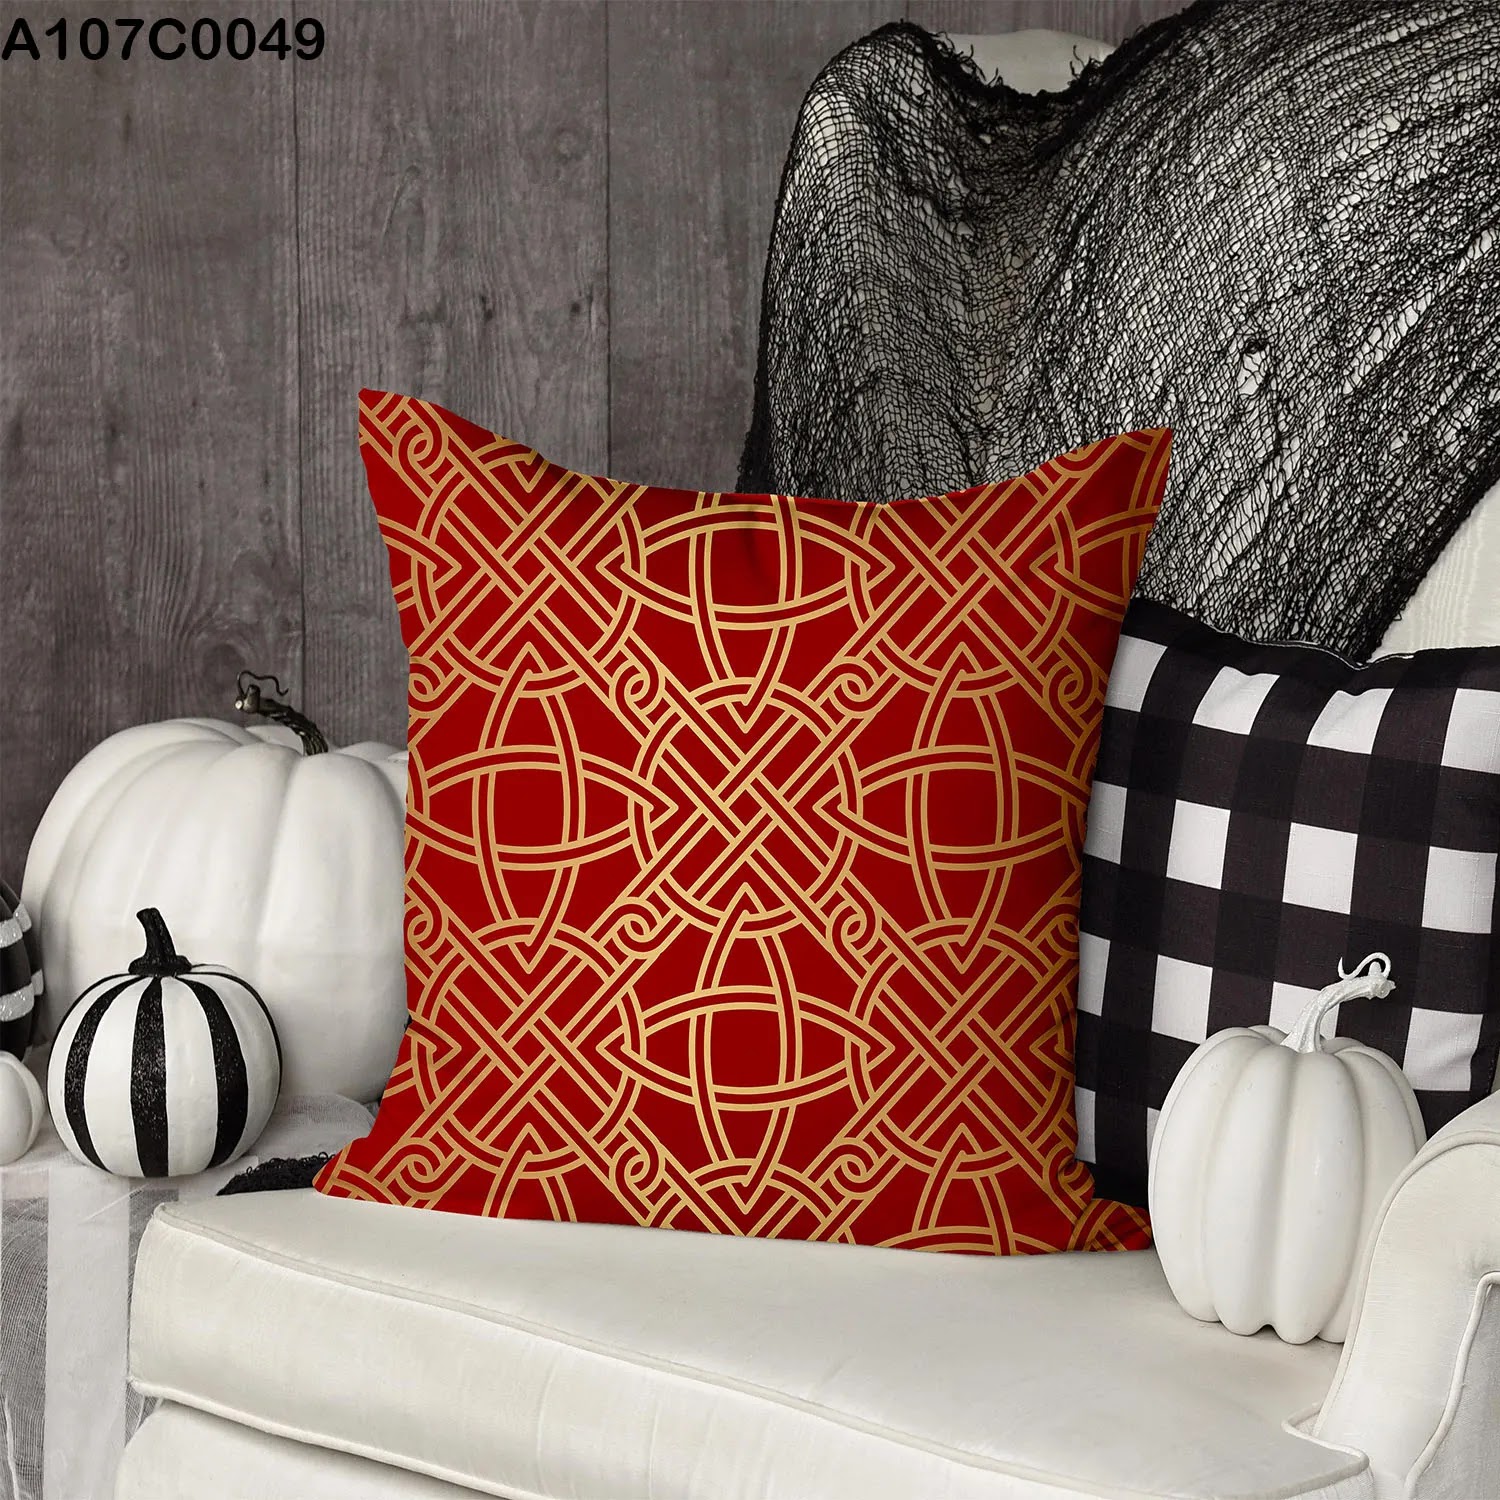 Red pillow case with gold lines and shapes